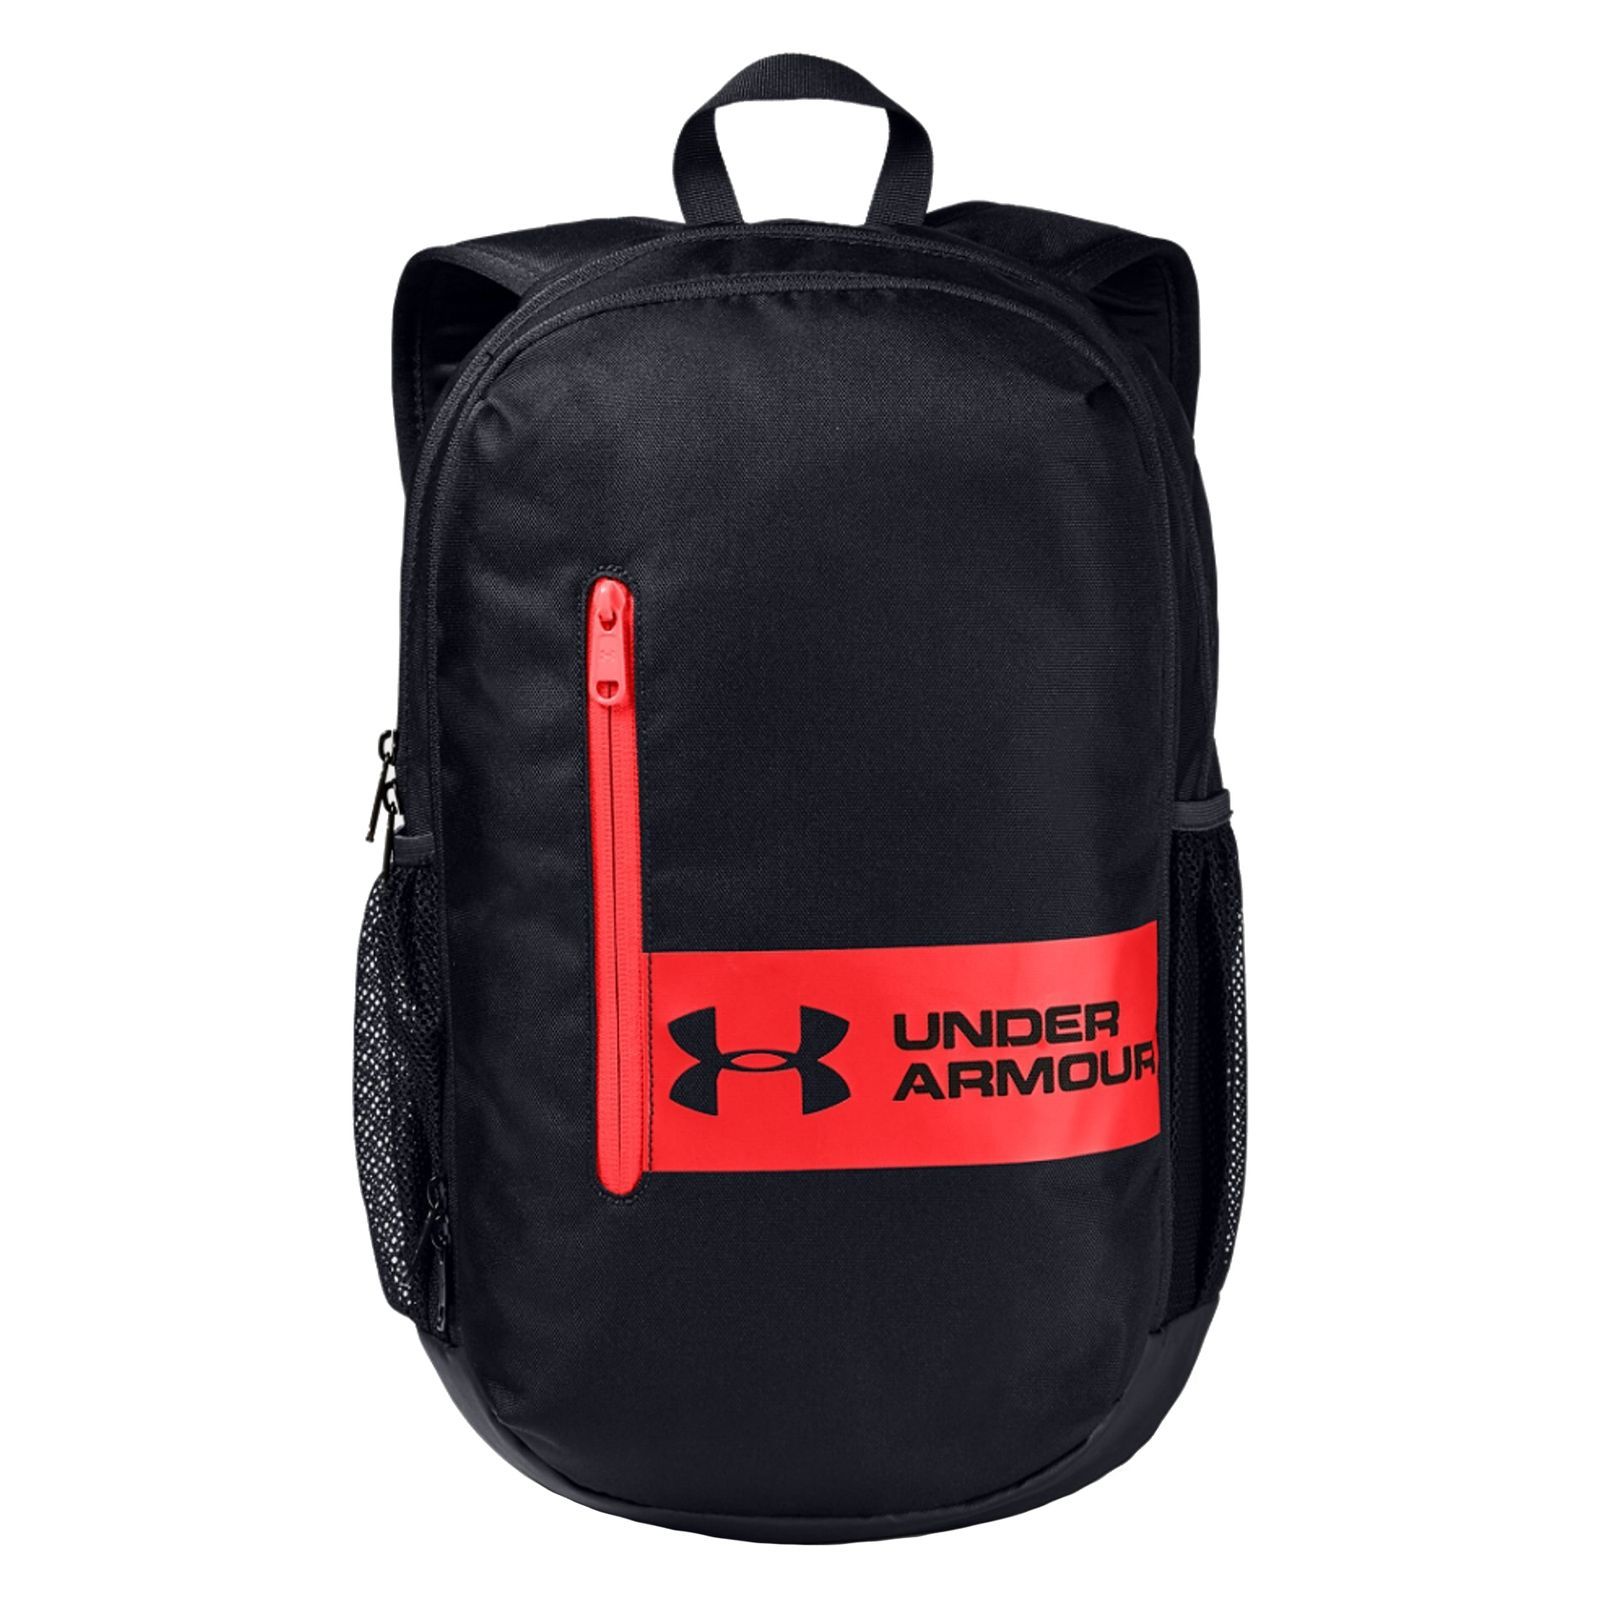 Rucsac UNDER ARMOUR unisex ROLAND BACKPACK - 1327793004